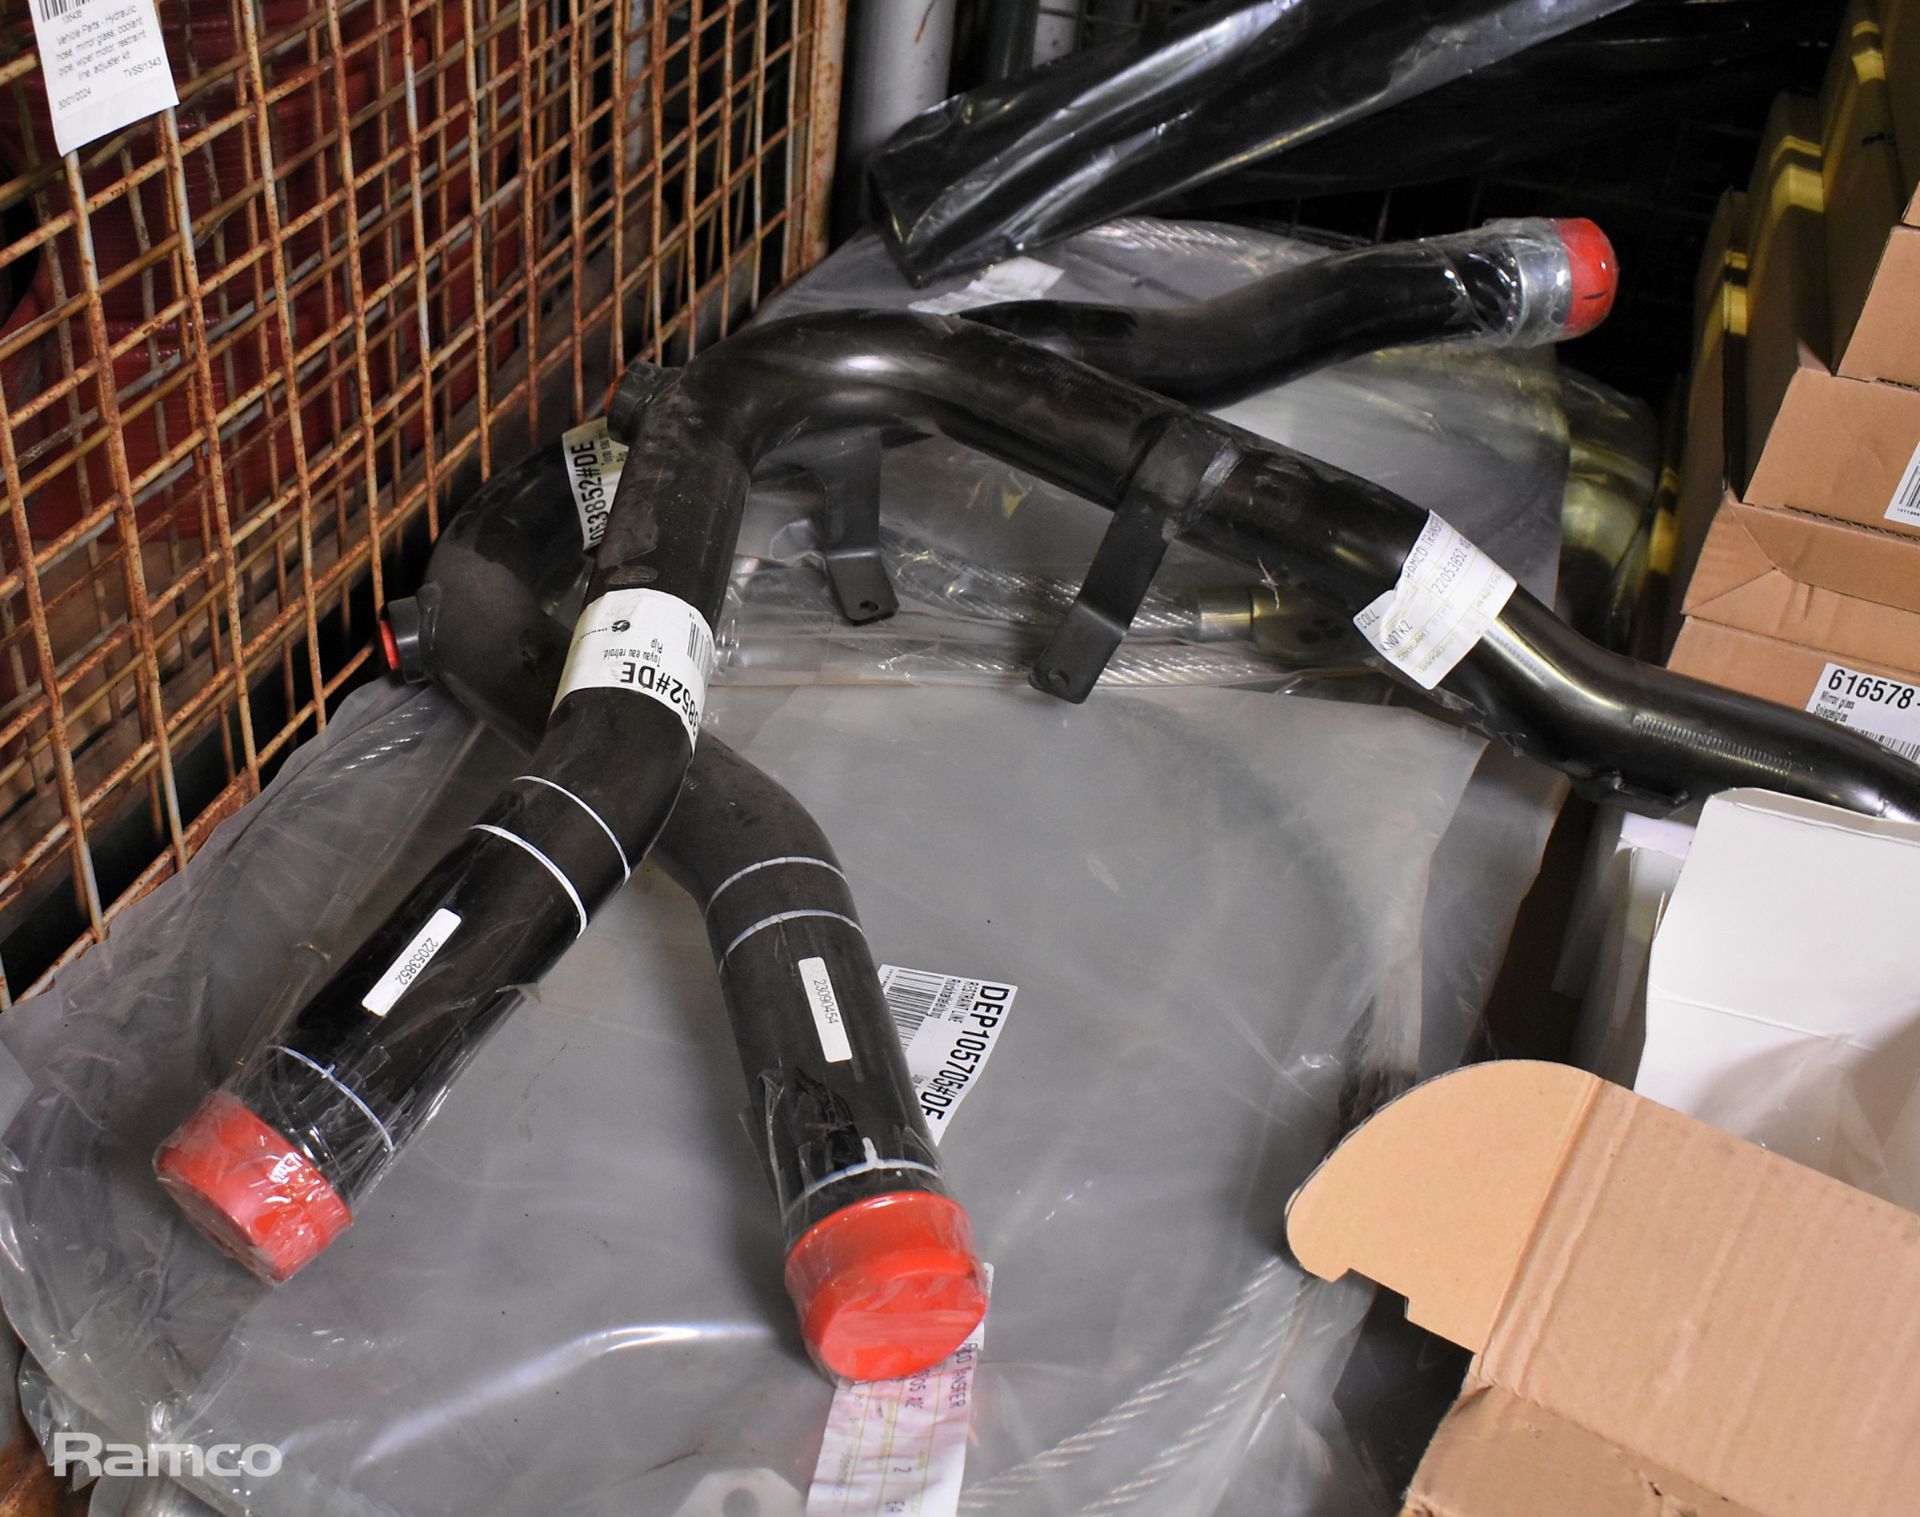 Vehicle Parts - Hydraulic hose, mirror glass, coolant pipe, wiper motor, restraint line - Image 2 of 16